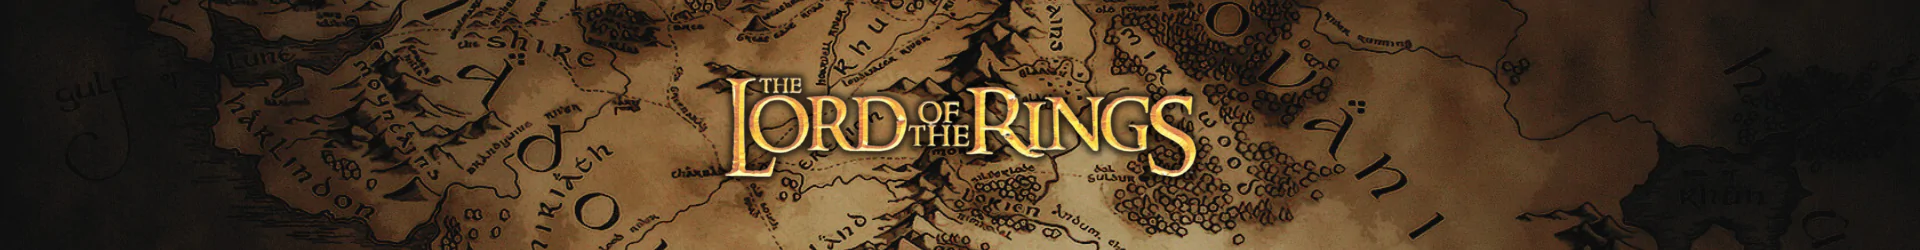 Lord of the Rings dekorationen banner